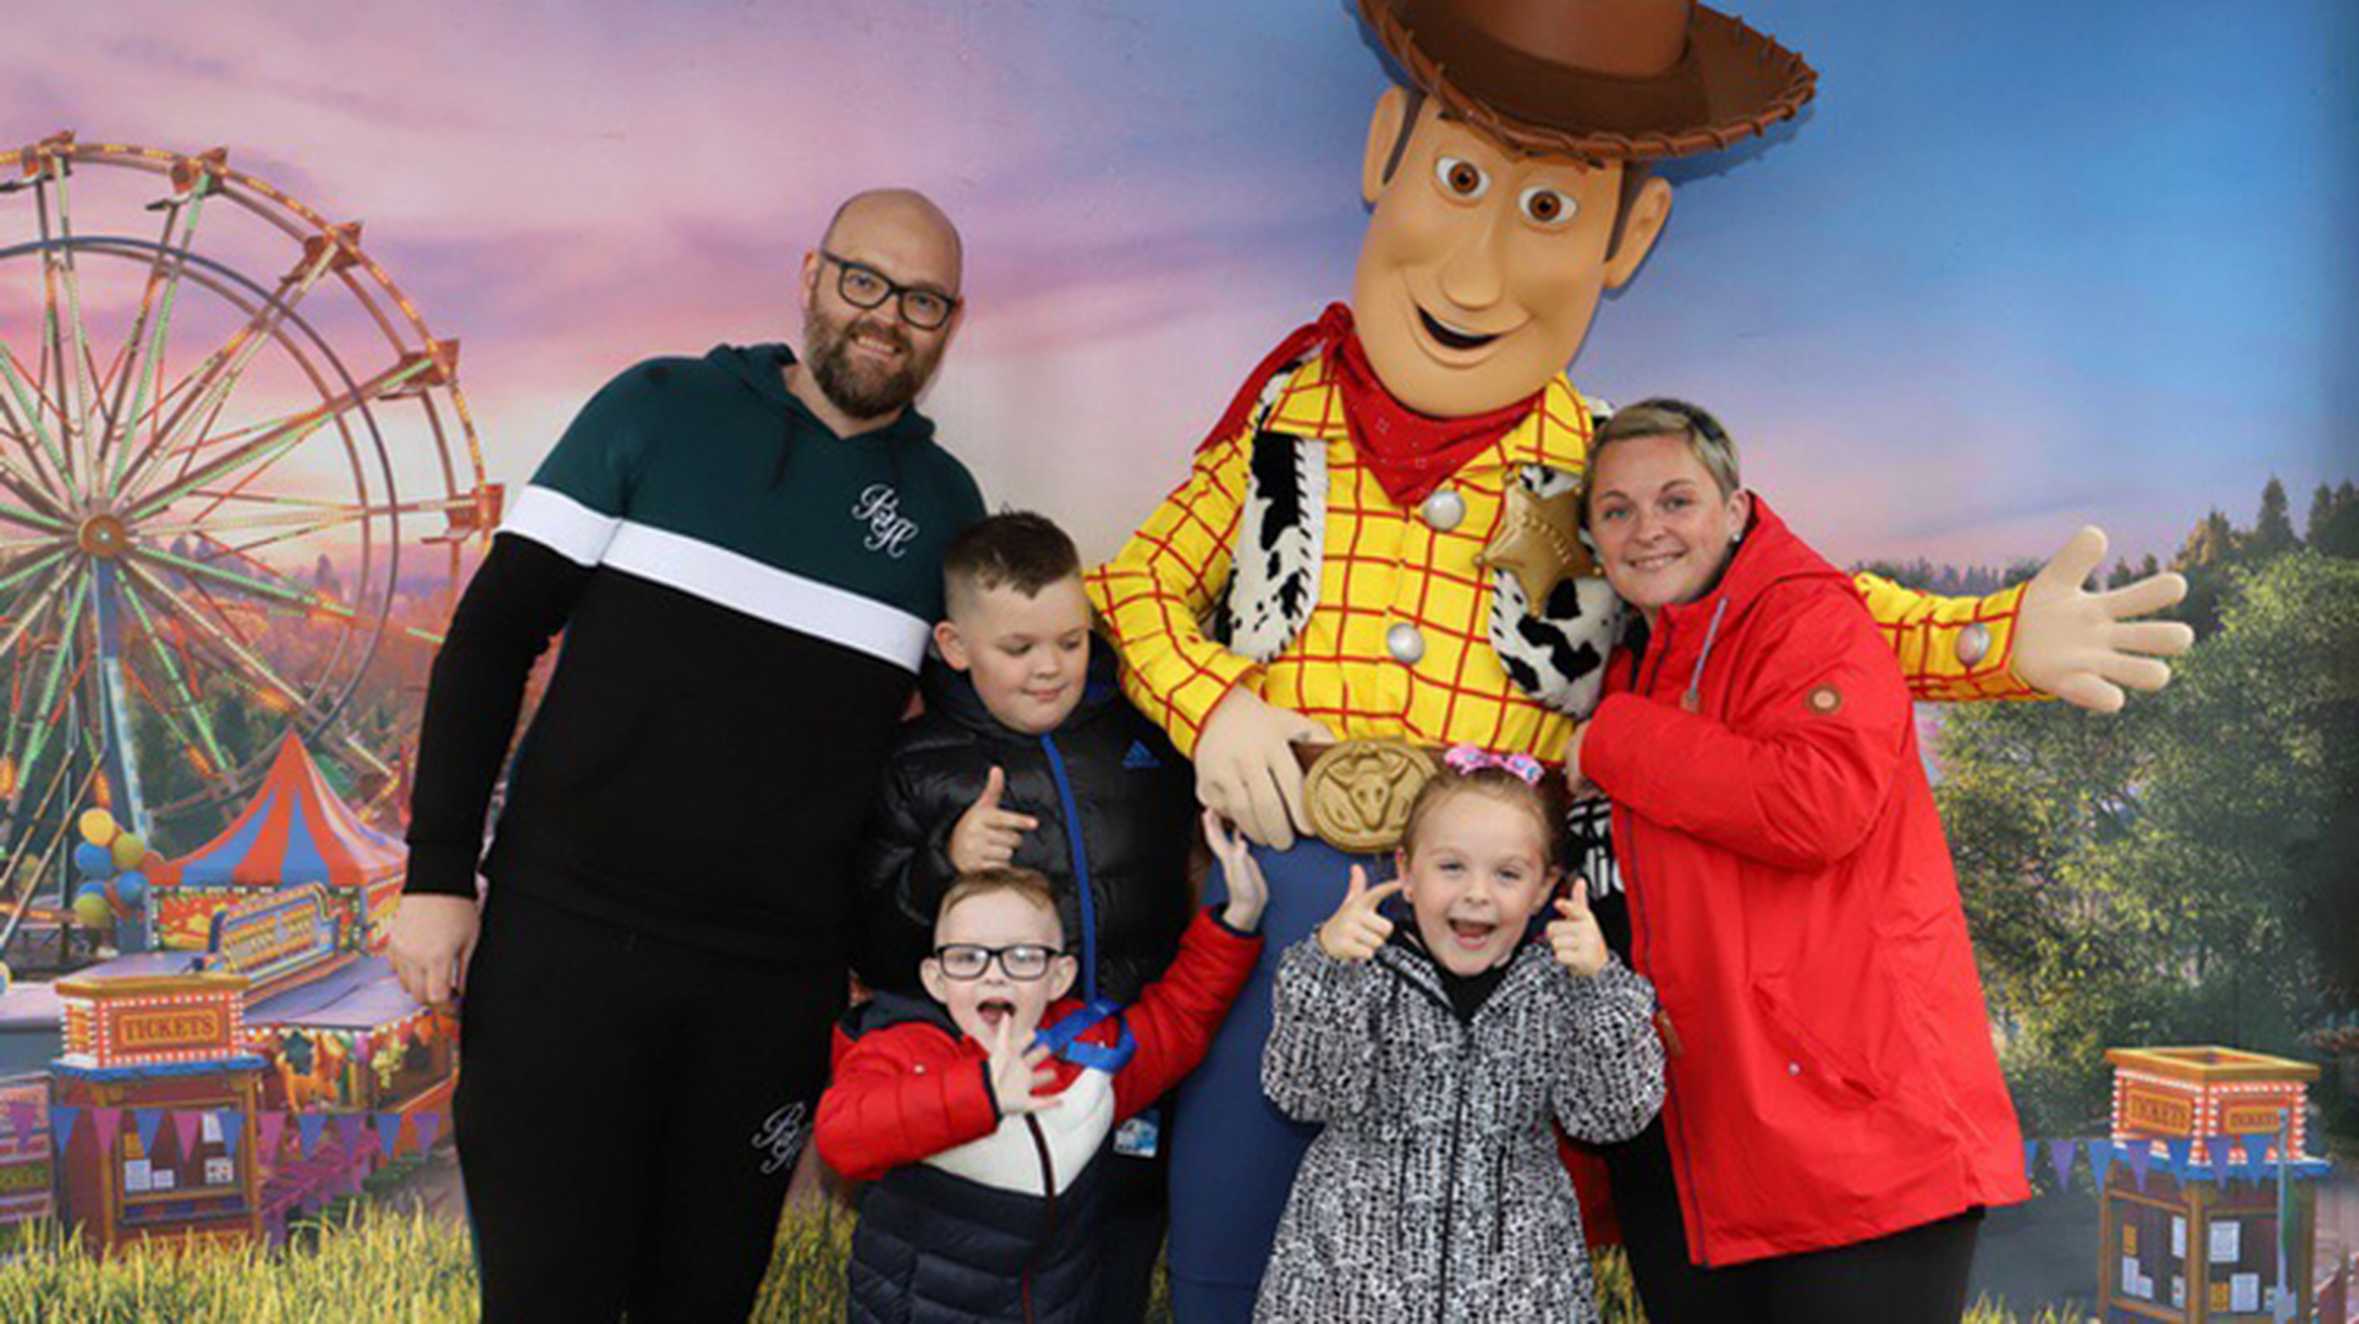 Patrick and his family posing with Woody from Toy Story.